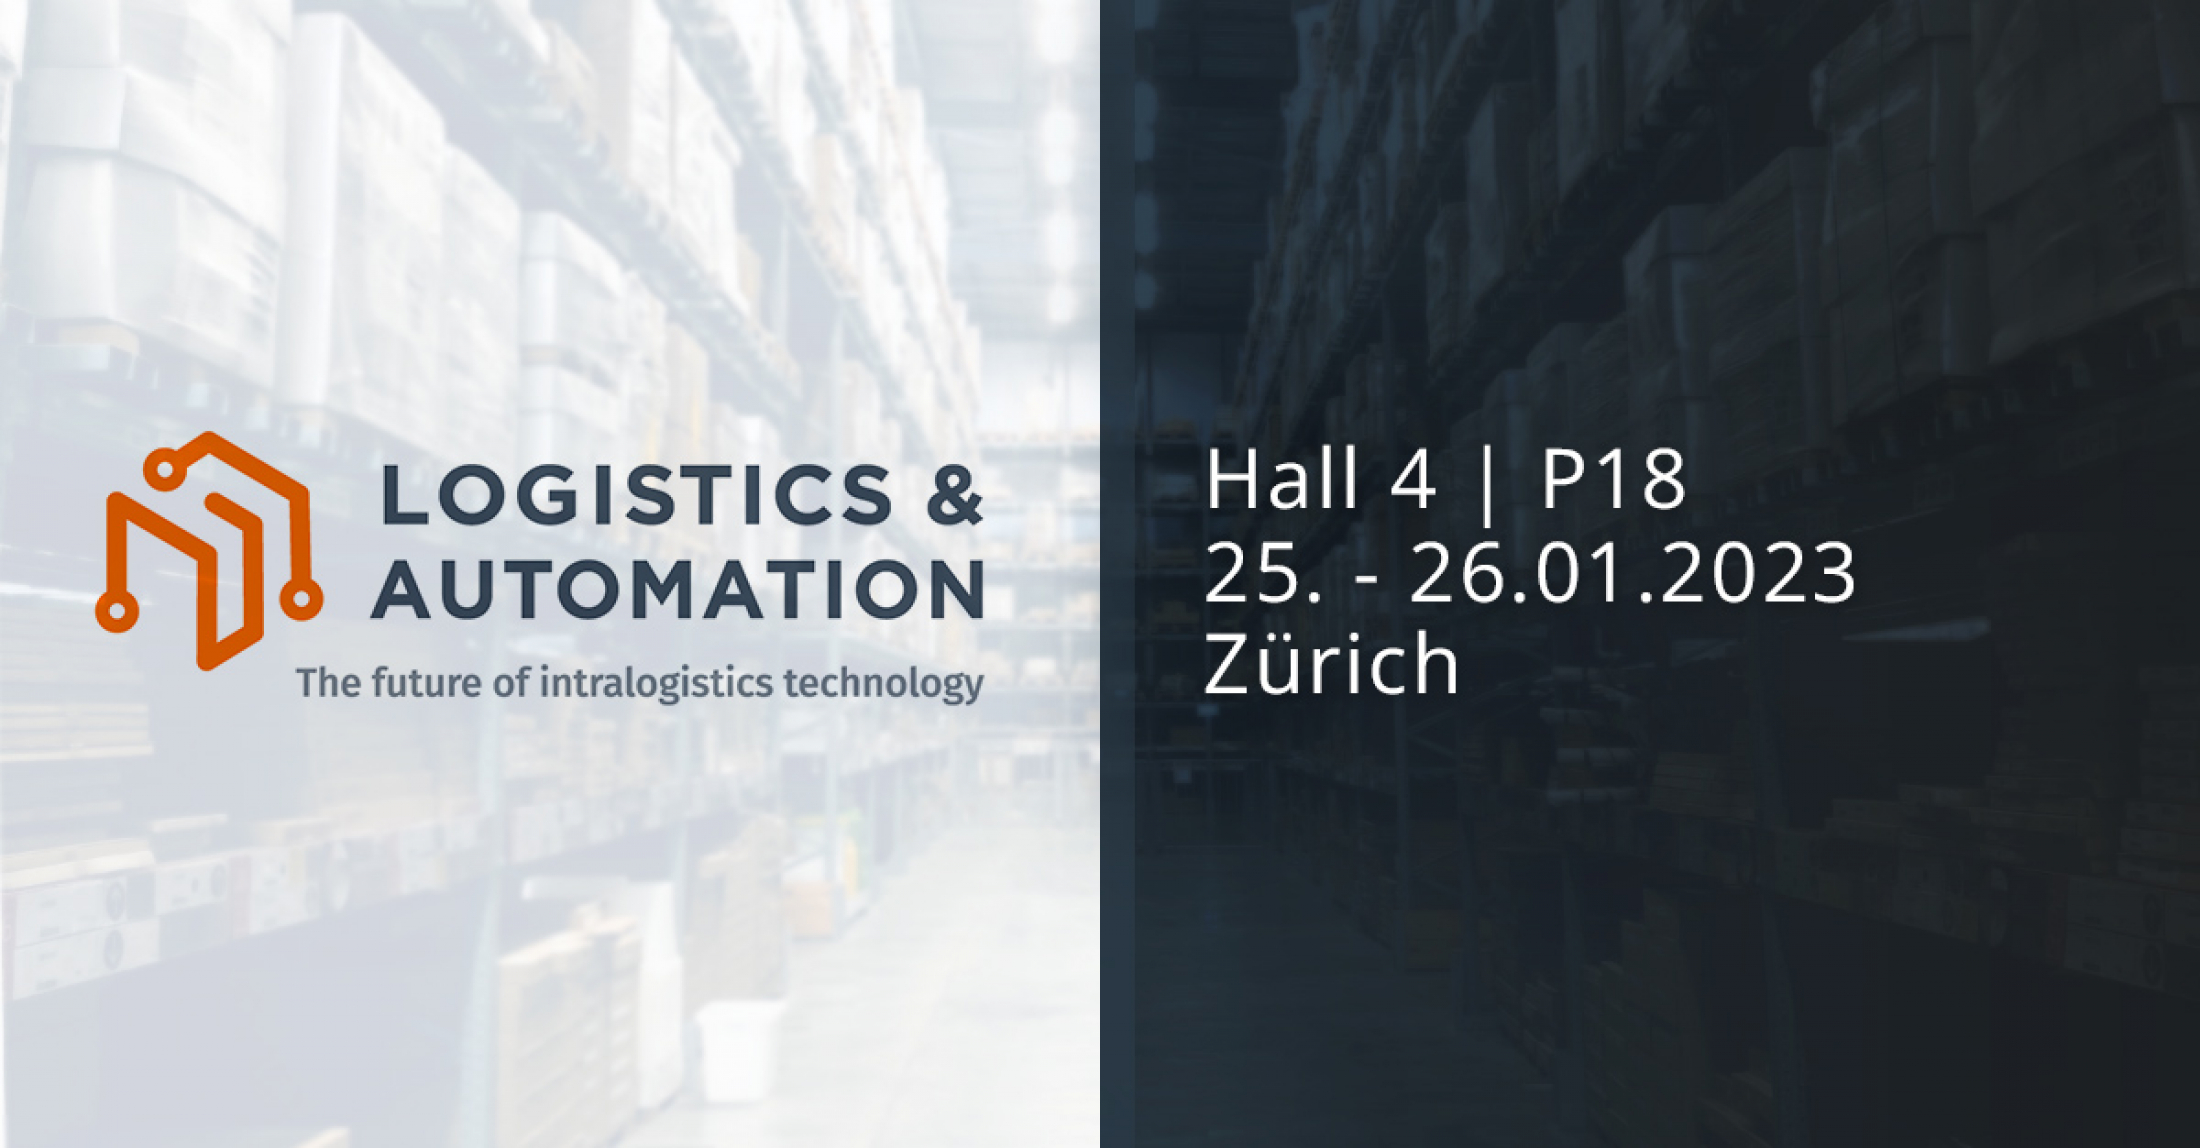 CIM showcase their latest innovations at Logistics &amp; Automation in Zürich